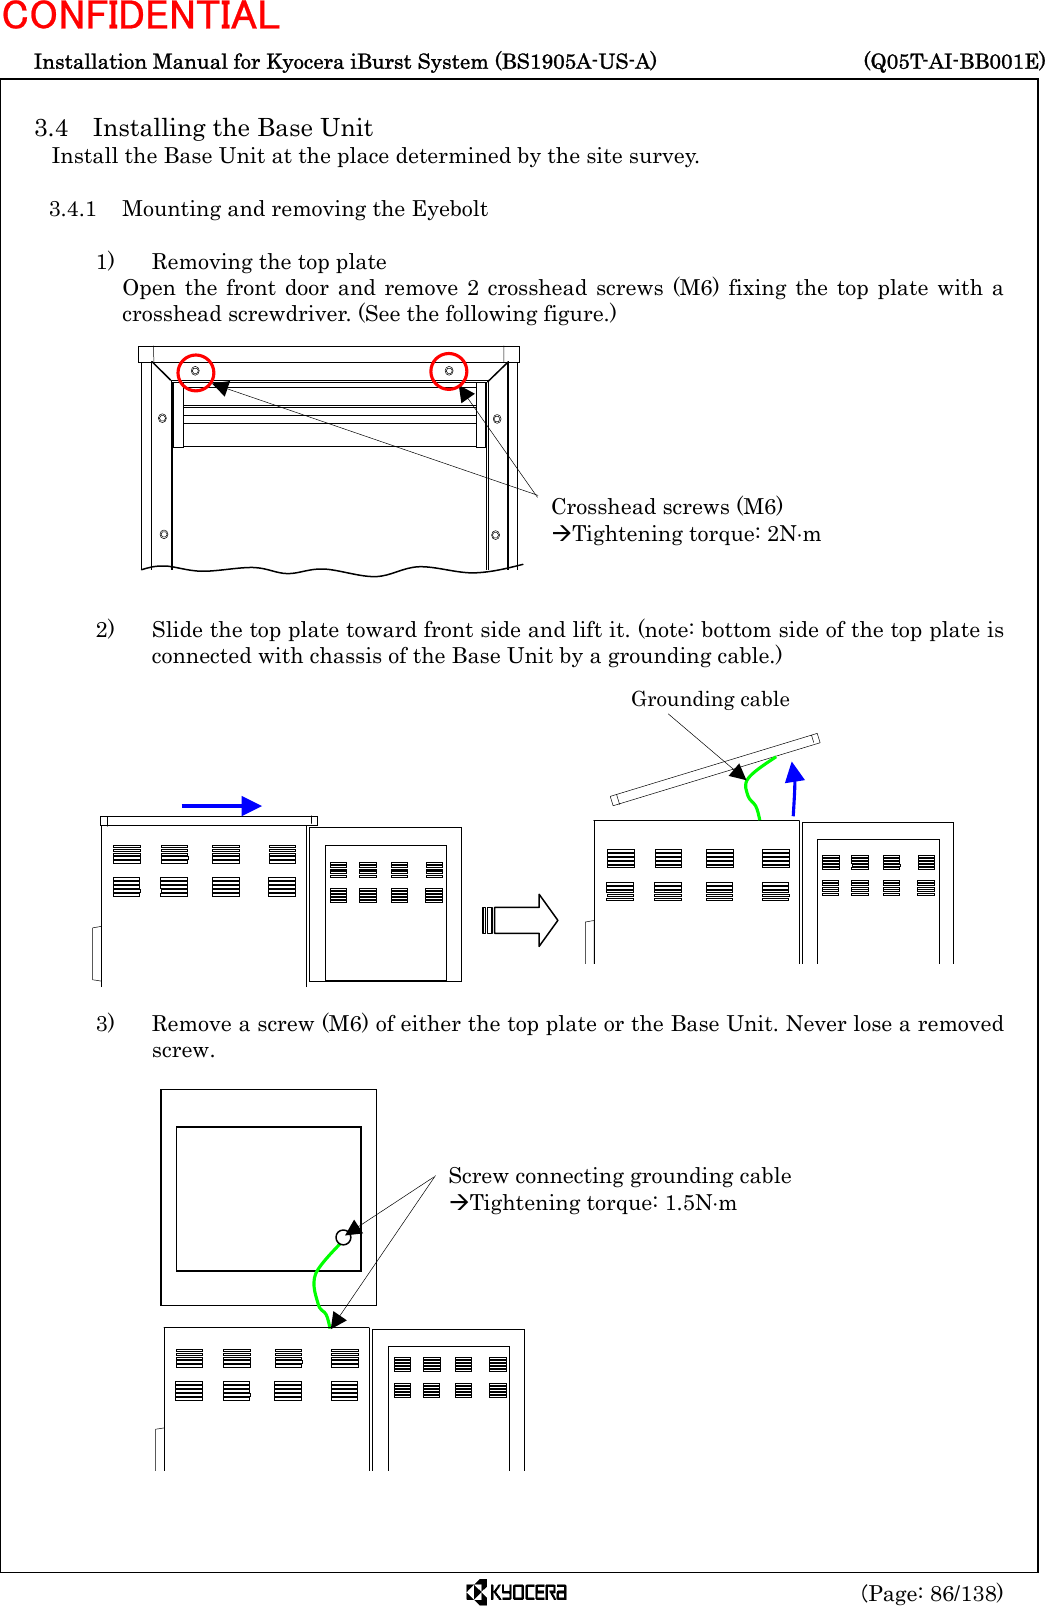  Installation Manual for Kyocera iBurst System (BS1905A-US-A)     (Q05T-AI-BB001E) (Page: 86/138) CONFIDENTIAL  3.4  Installing the Base Unit Install the Base Unit at the place determined by the site survey.  3.4.1  Mounting and removing the Eyebolt  1)    Removing the top plate Open the front door and remove 2 crosshead screws (M6) fixing the top plate with a crosshead screwdriver. (See the following figure.)            2)    Slide the top plate toward front side and lift it. (note: bottom side of the top plate is connected with chassis of the Base Unit by a grounding cable.)              3)    Remove a screw (M6) of either the top plate or the Base Unit. Never lose a removed screw.                 Crosshead screws (M6) ÆTightening torque: 2N⋅m Grounding cable Screw connecting grounding cable ÆTightening torque: 1.5N⋅m 